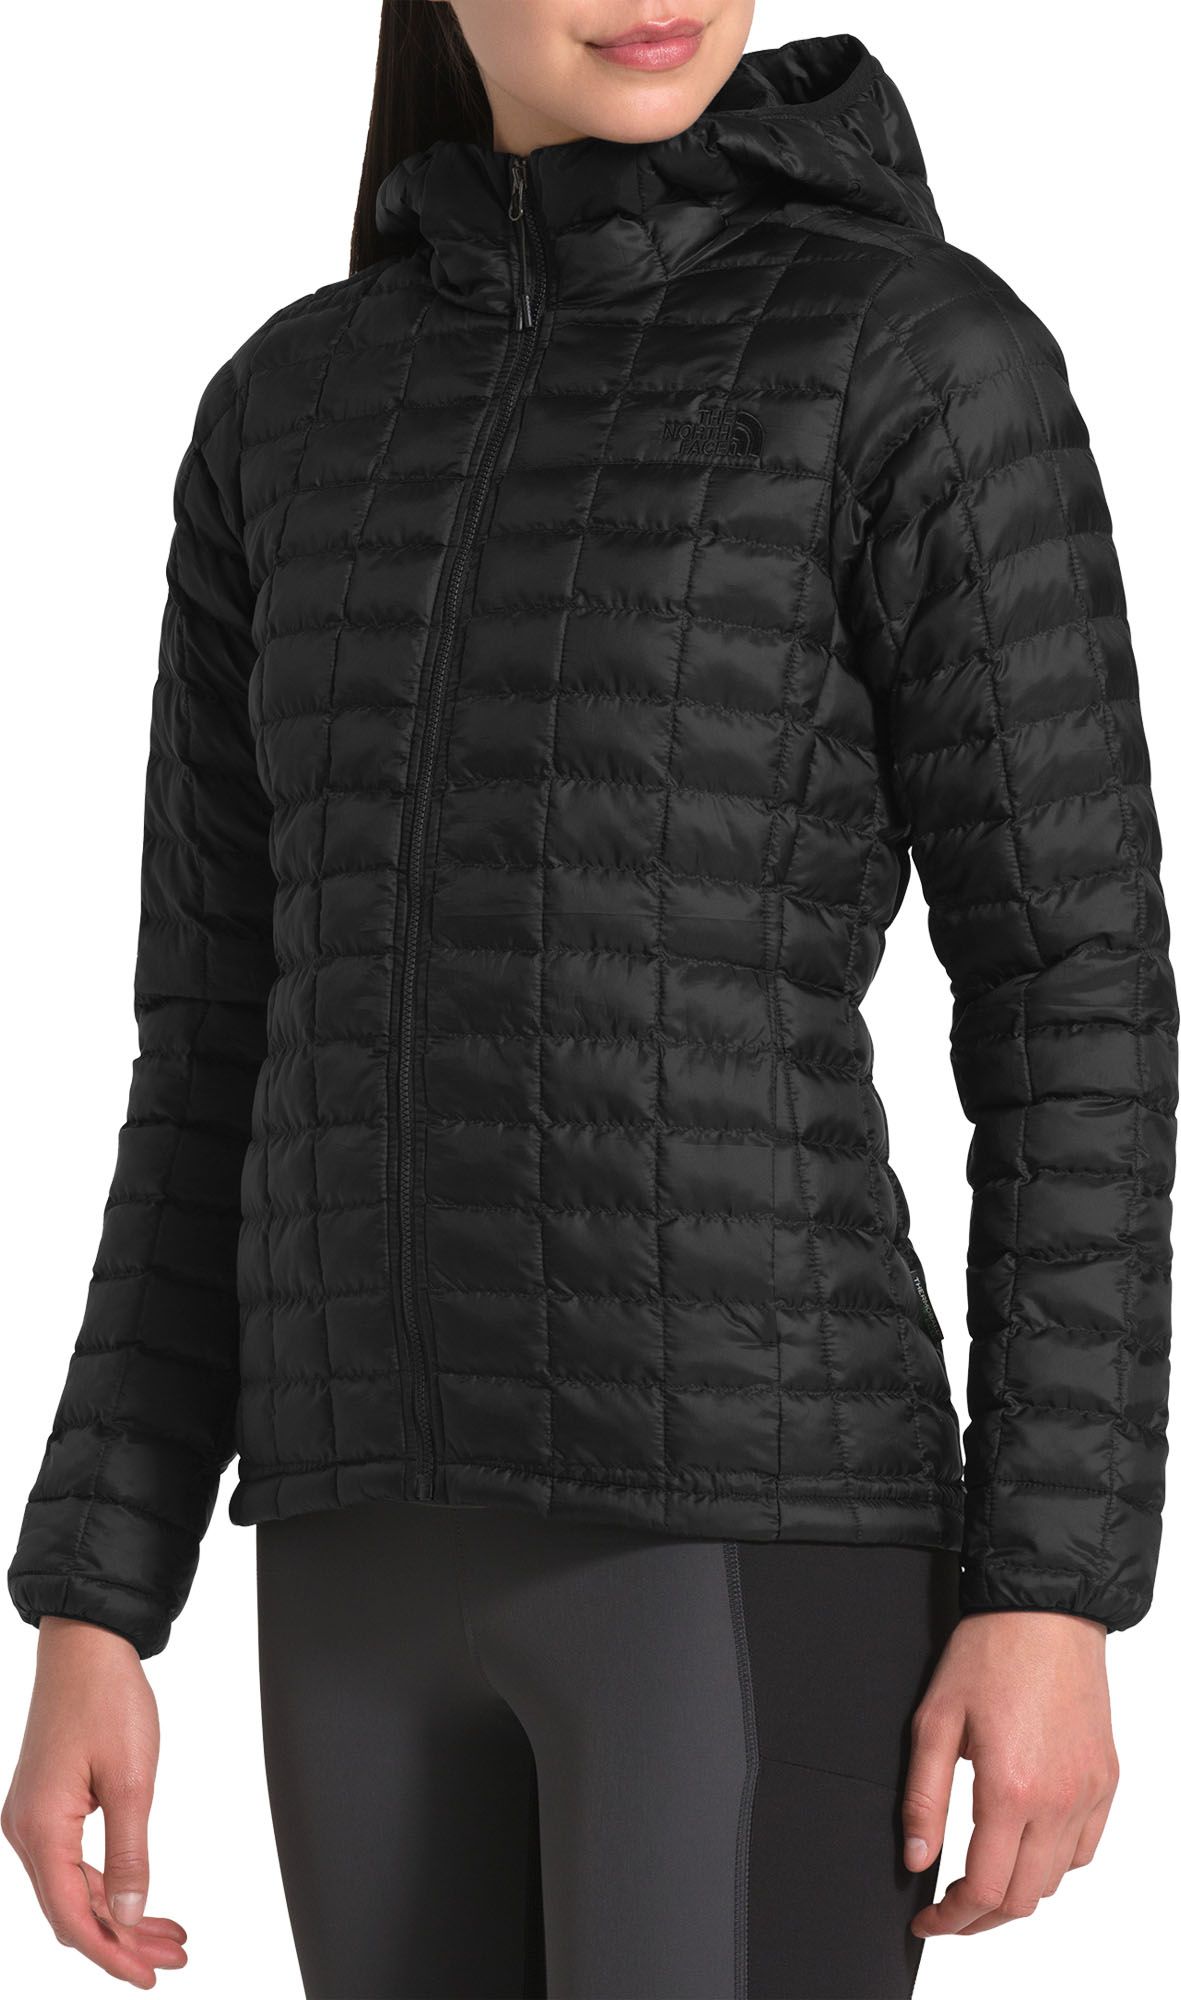 thermoball women's jacket sale